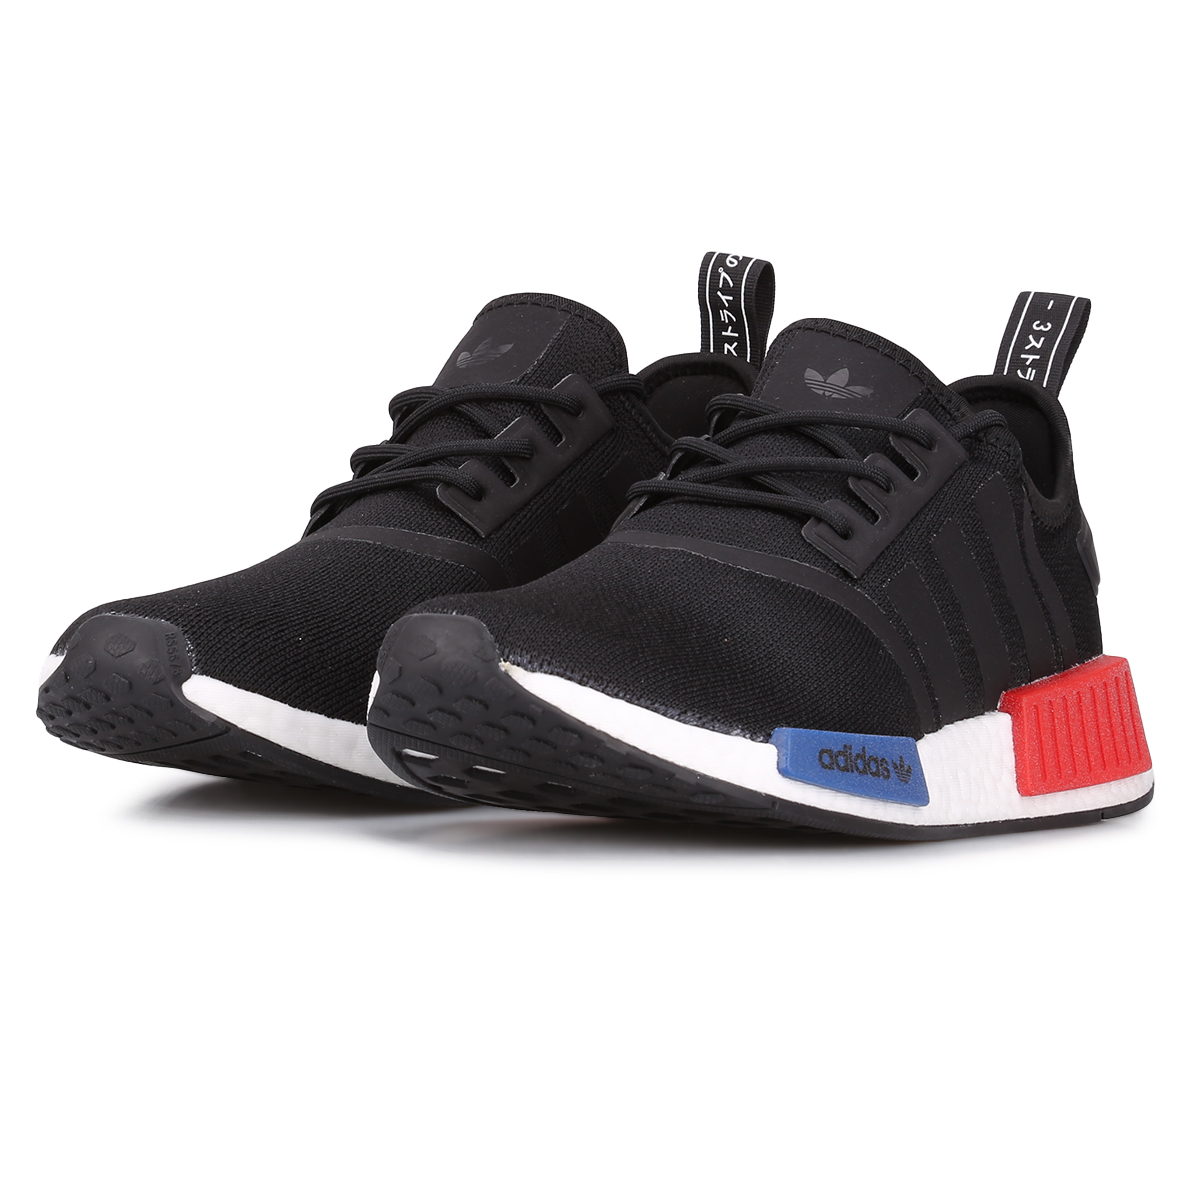 Zapatillas adidas Nmd_R1,  image number null